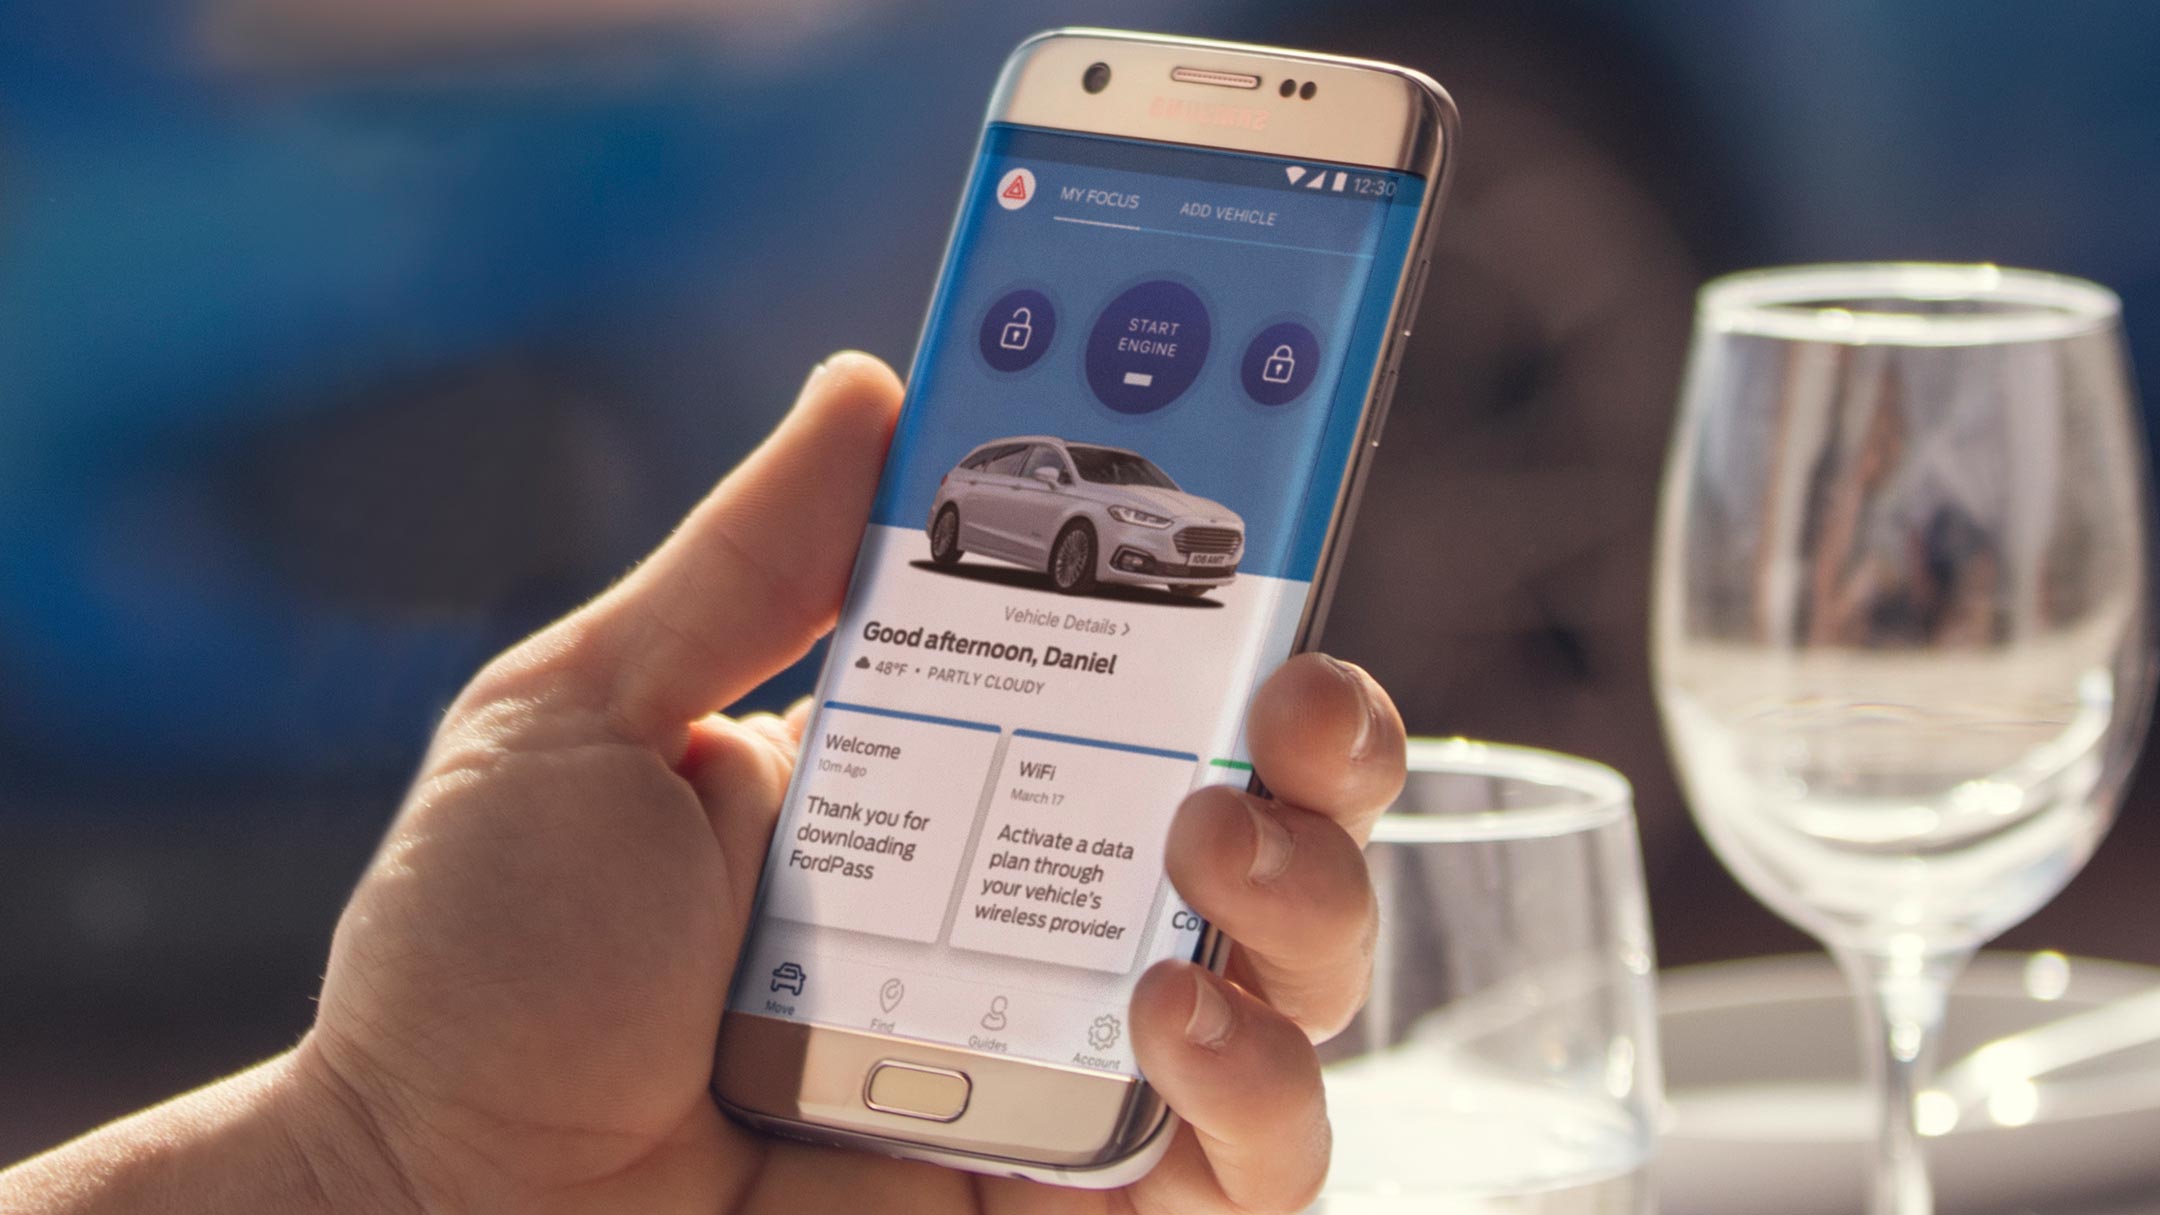 Hand with smartphone showing the Mondeo in the FordPass app